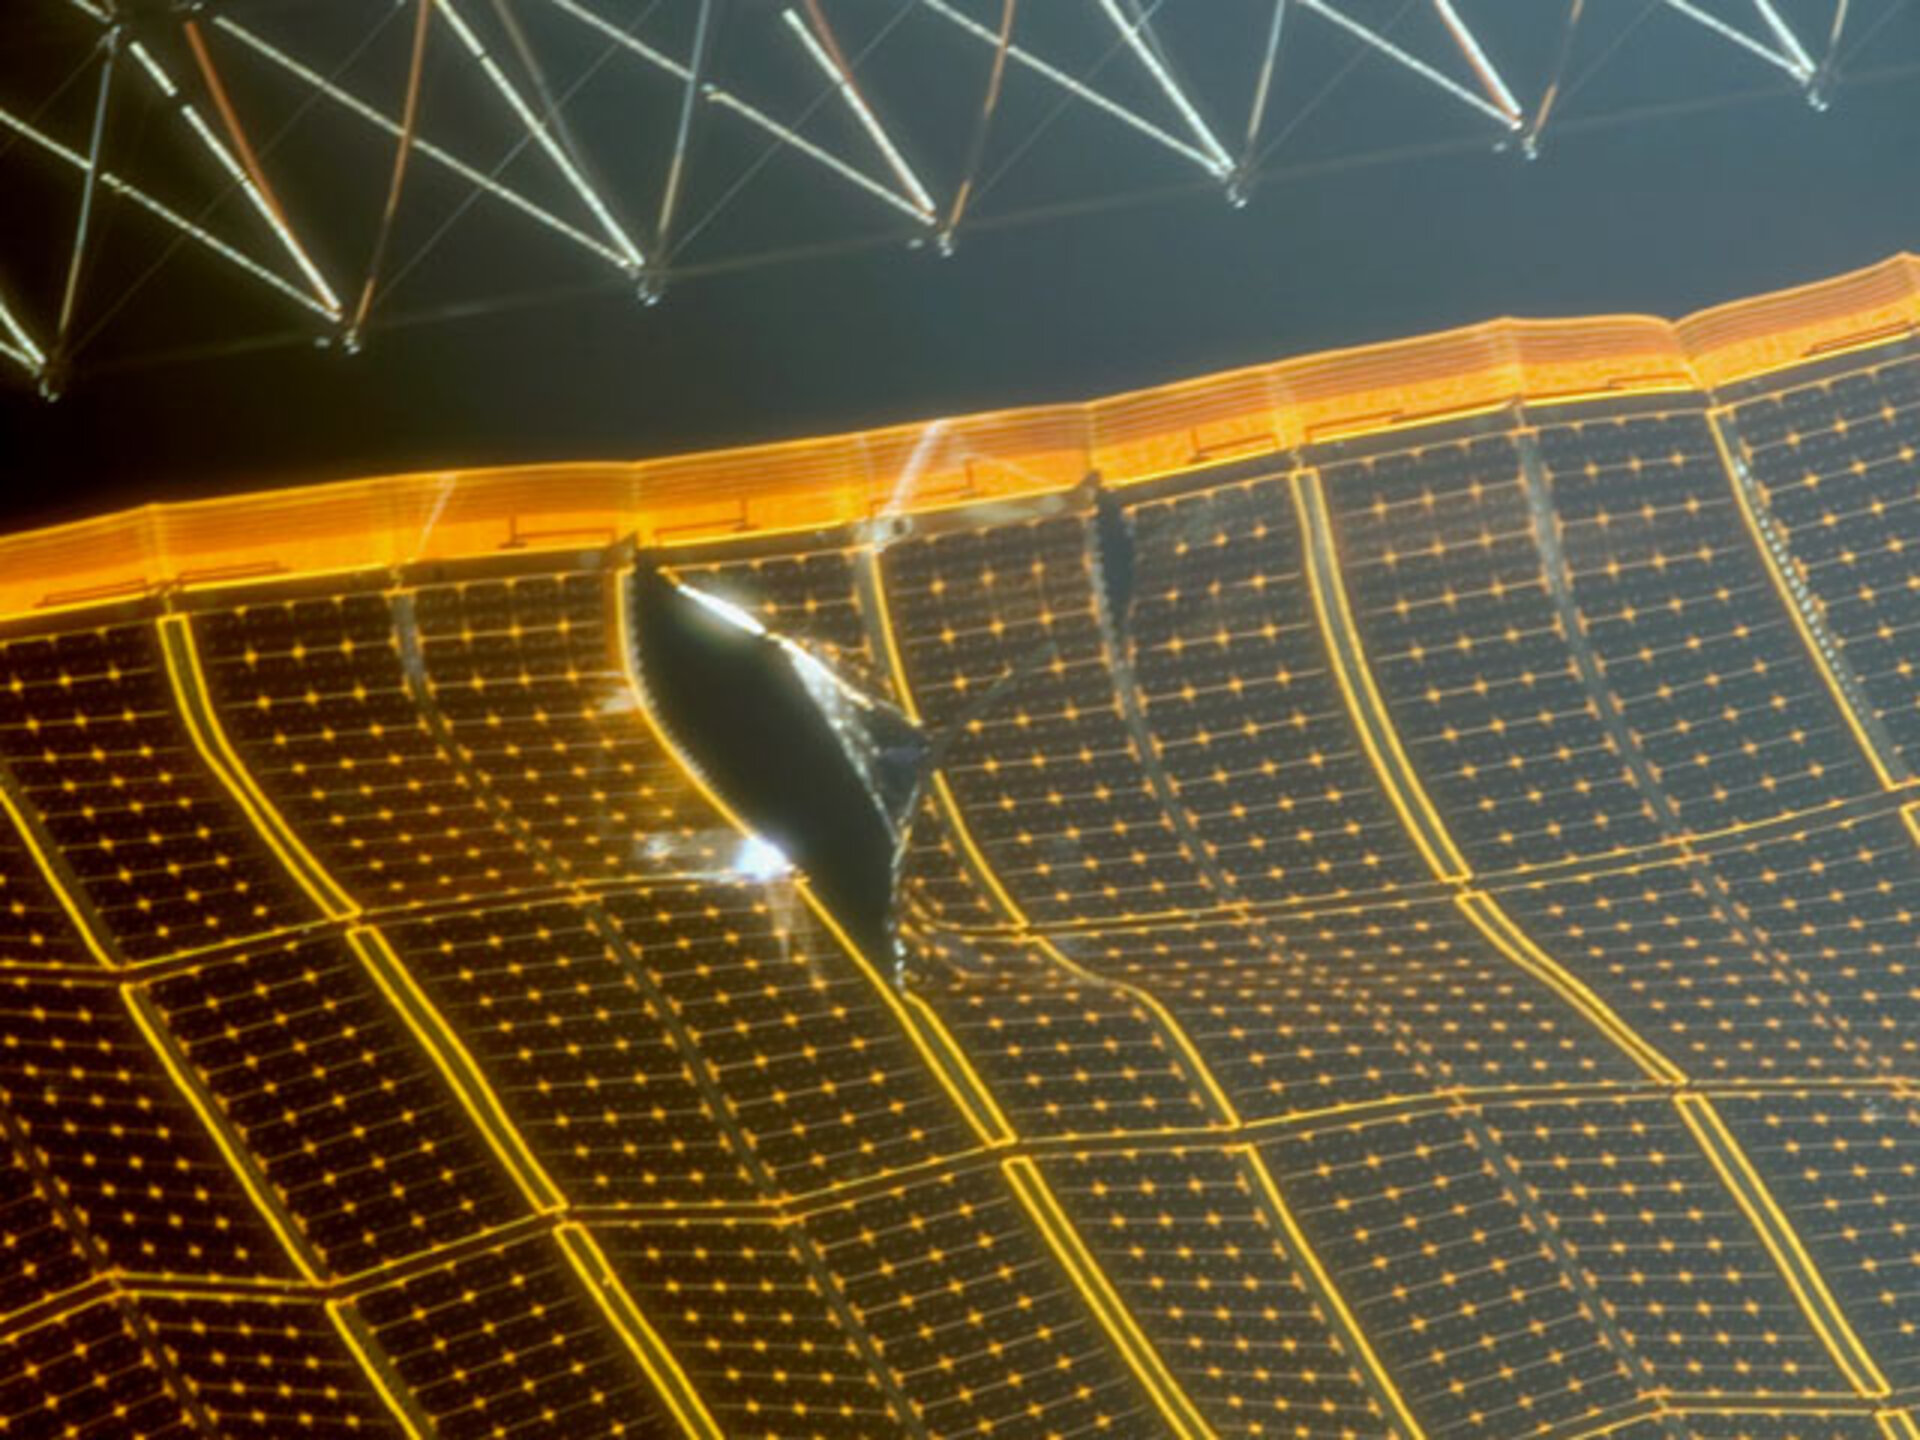 Two tears appeared in one of the P6 solar arrays during deployment